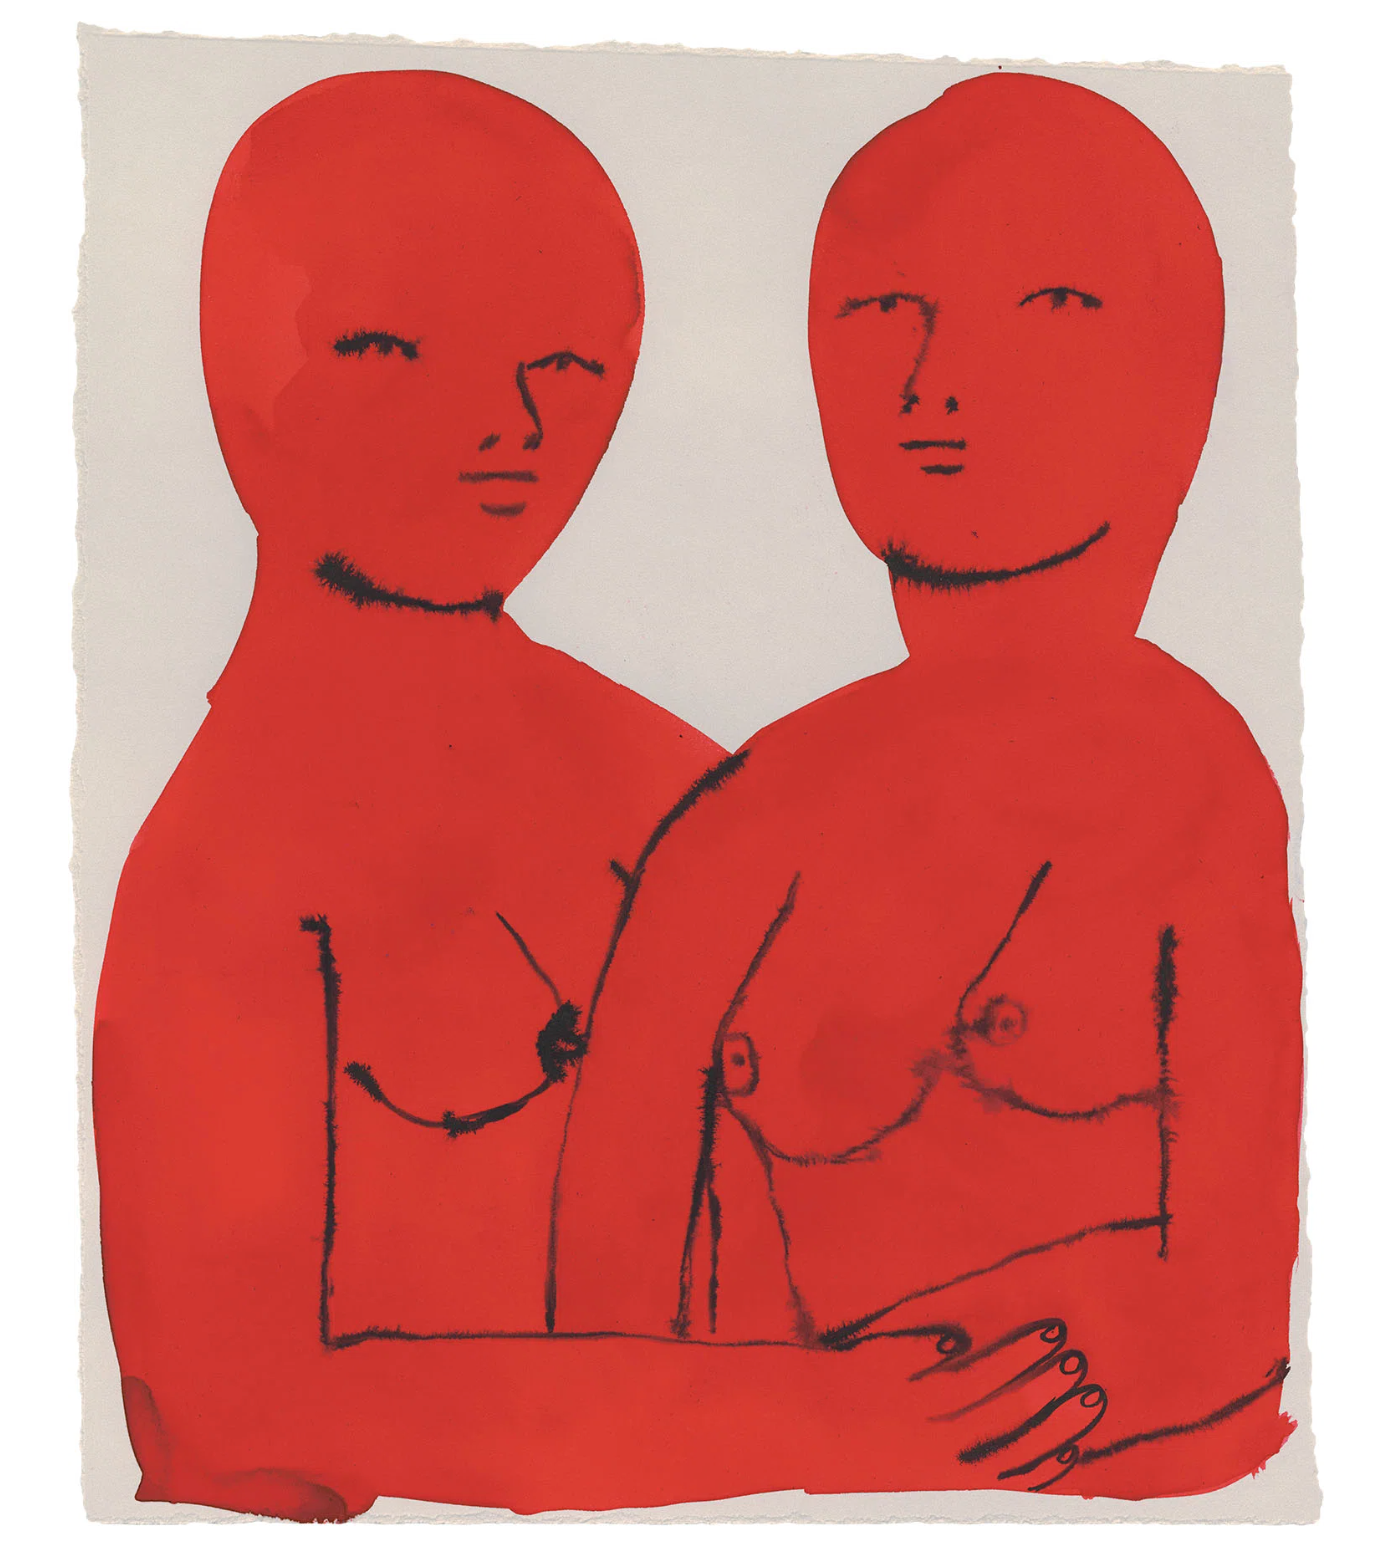 It's Nice That: Emma Kohlmann on nudes, prehistoric influences and an obsession with scanning